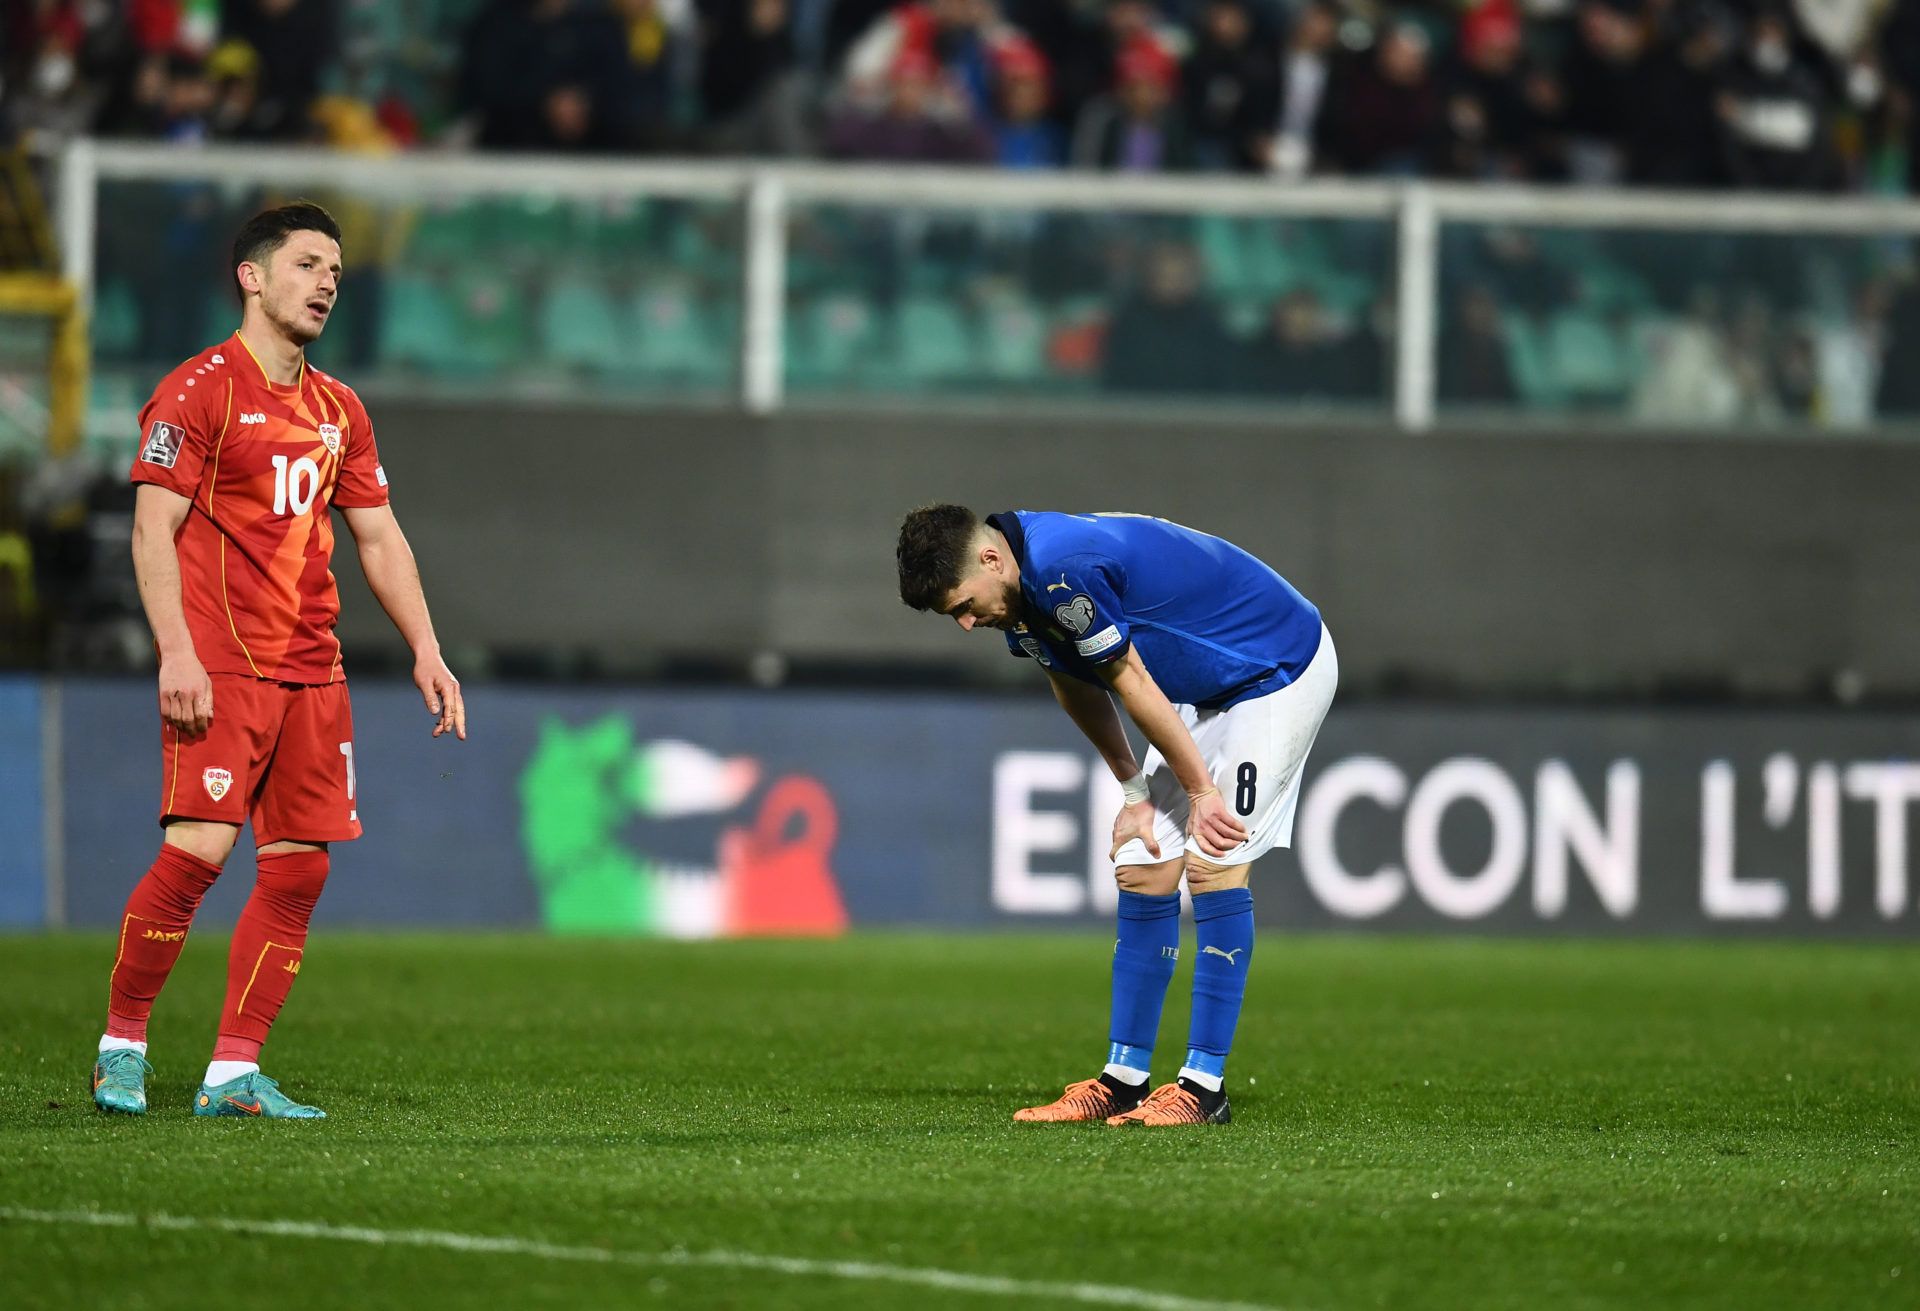 Italy v North Macedonia: Knockout Round Play-Offs - 2022 FIFA World Cup Qualifier